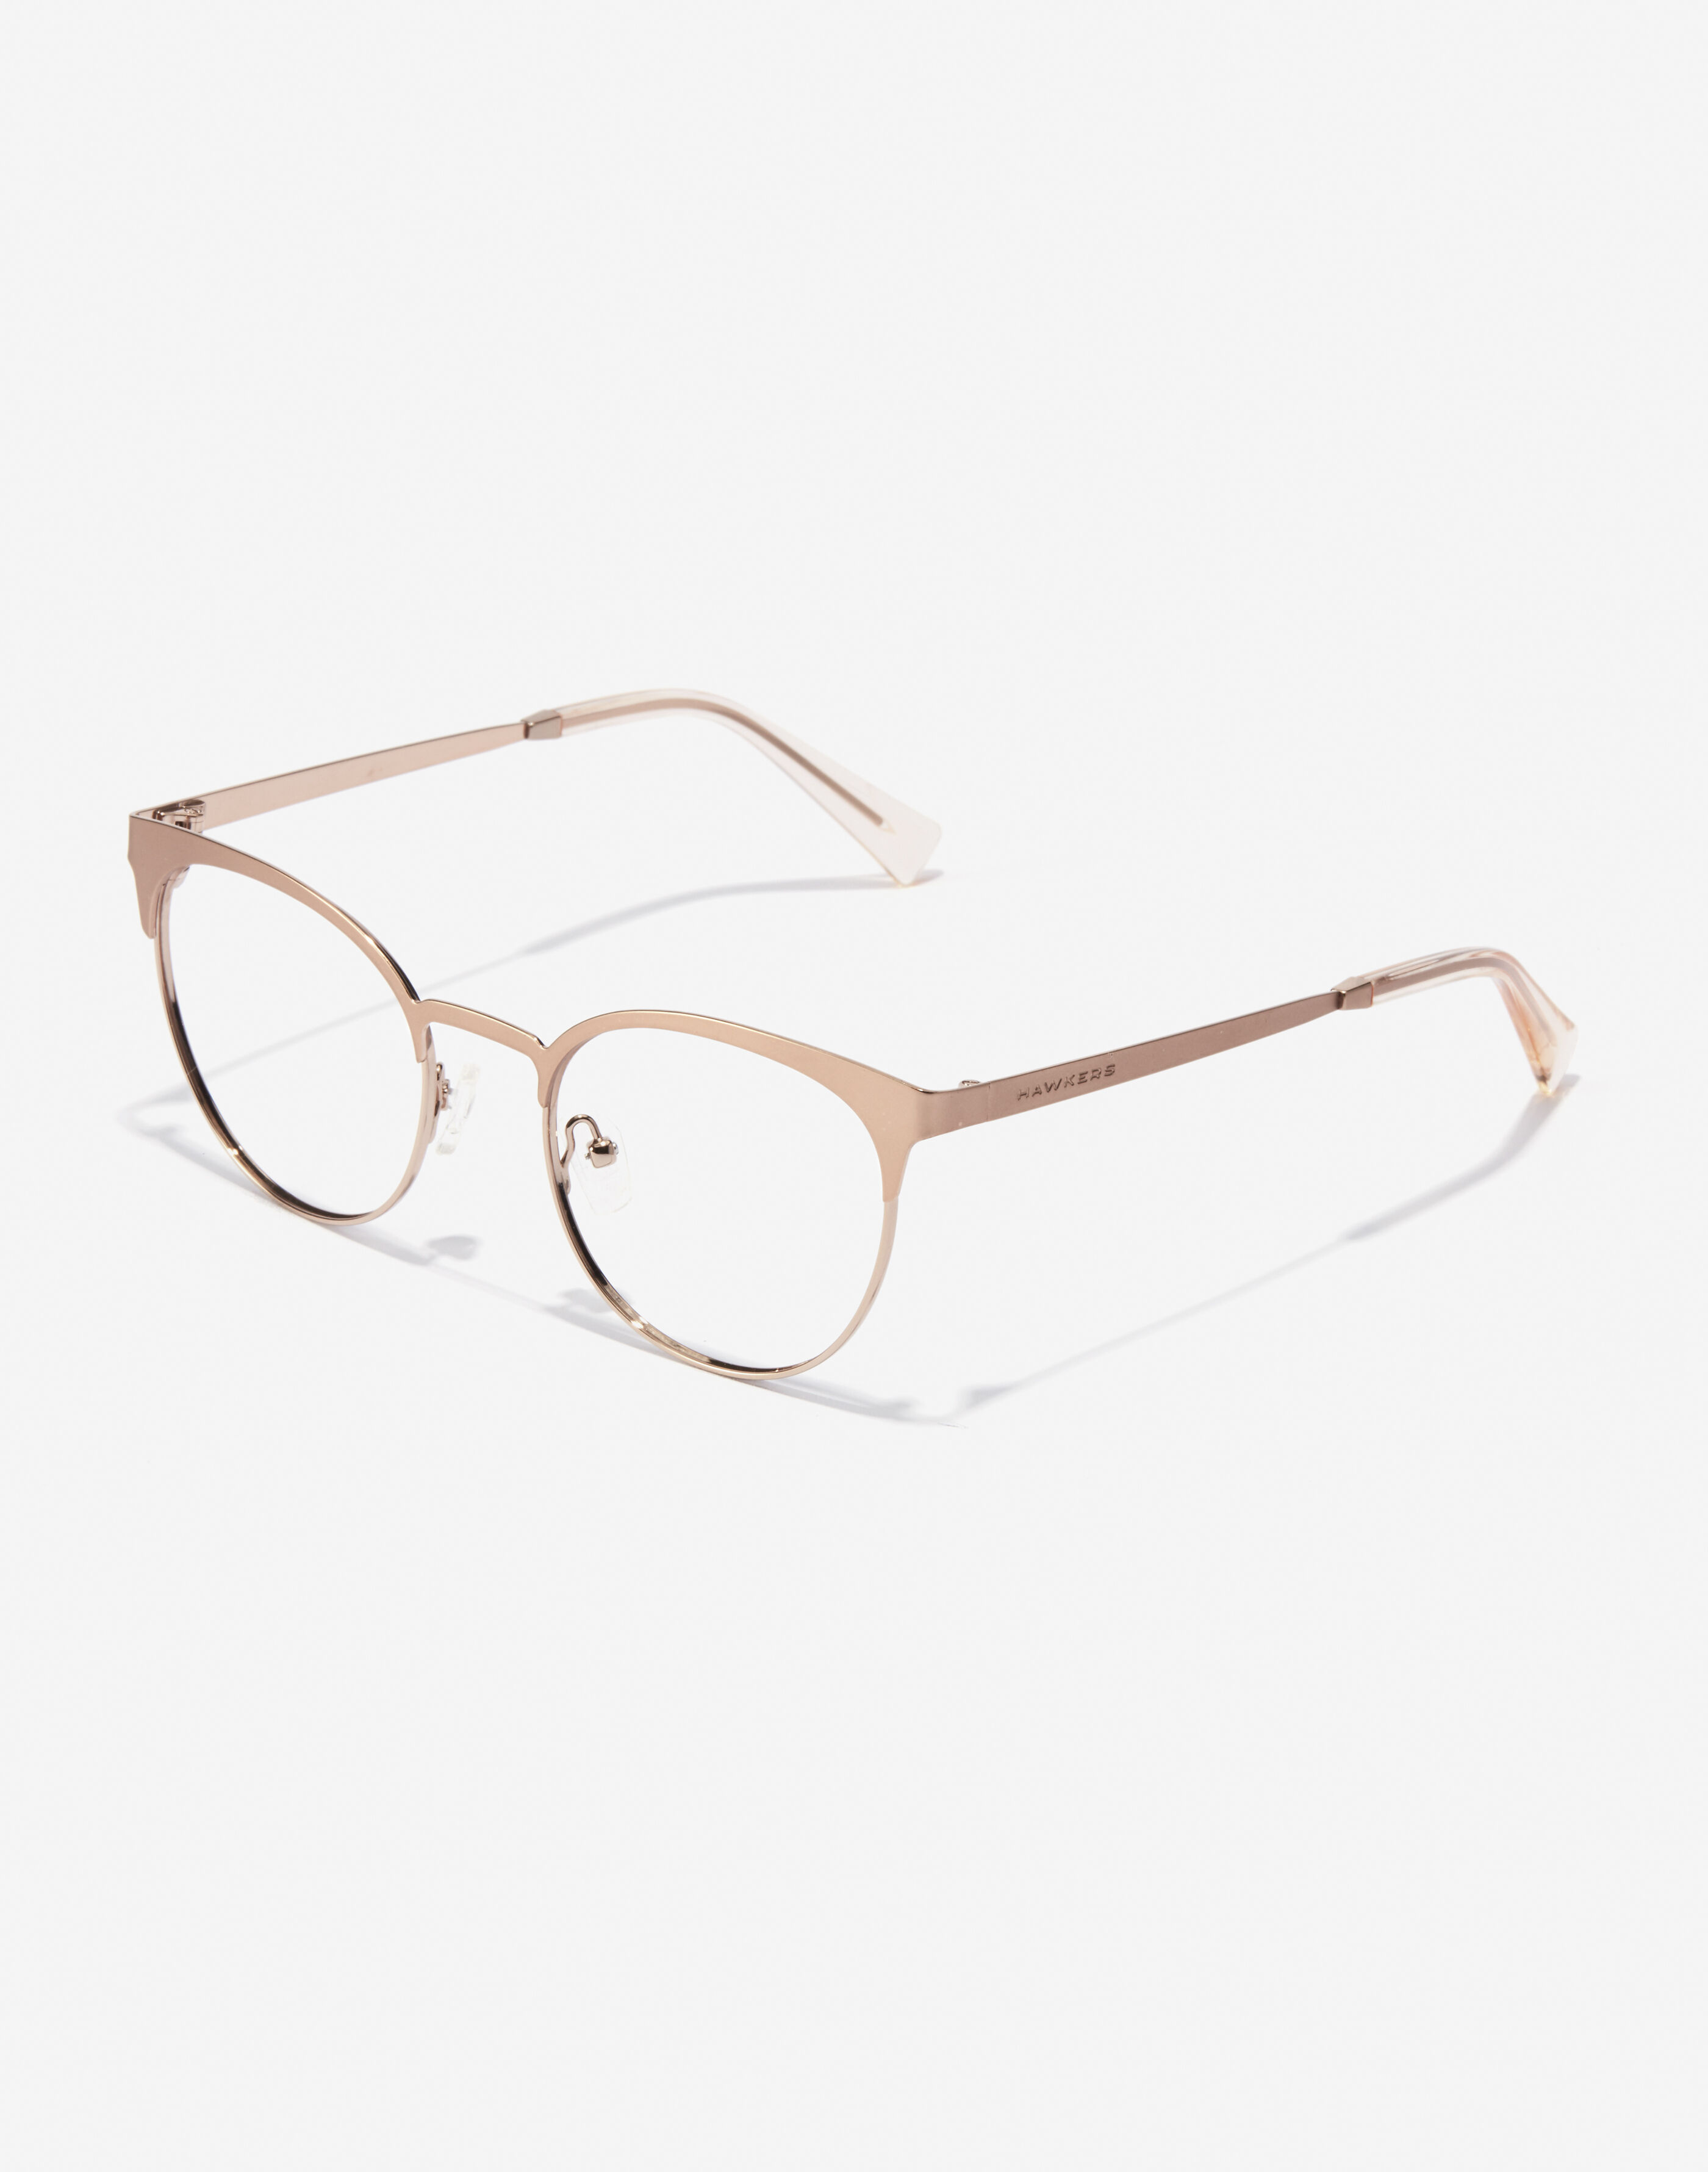 Buy Eyeglasses Online | Hawkers® Official Store